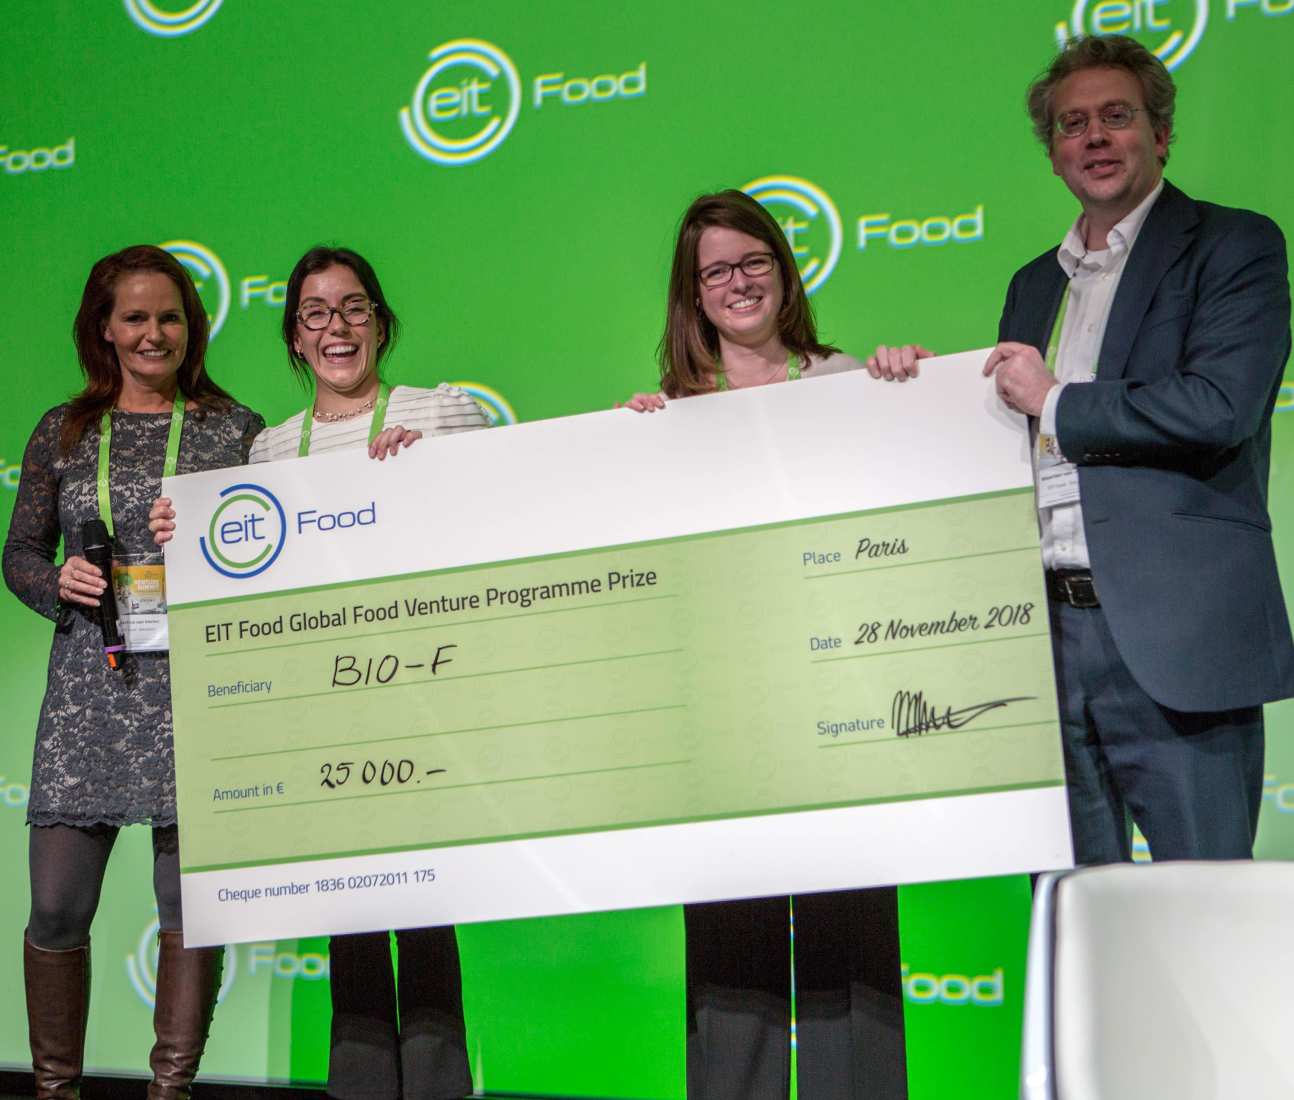 Receiving a giant cheque